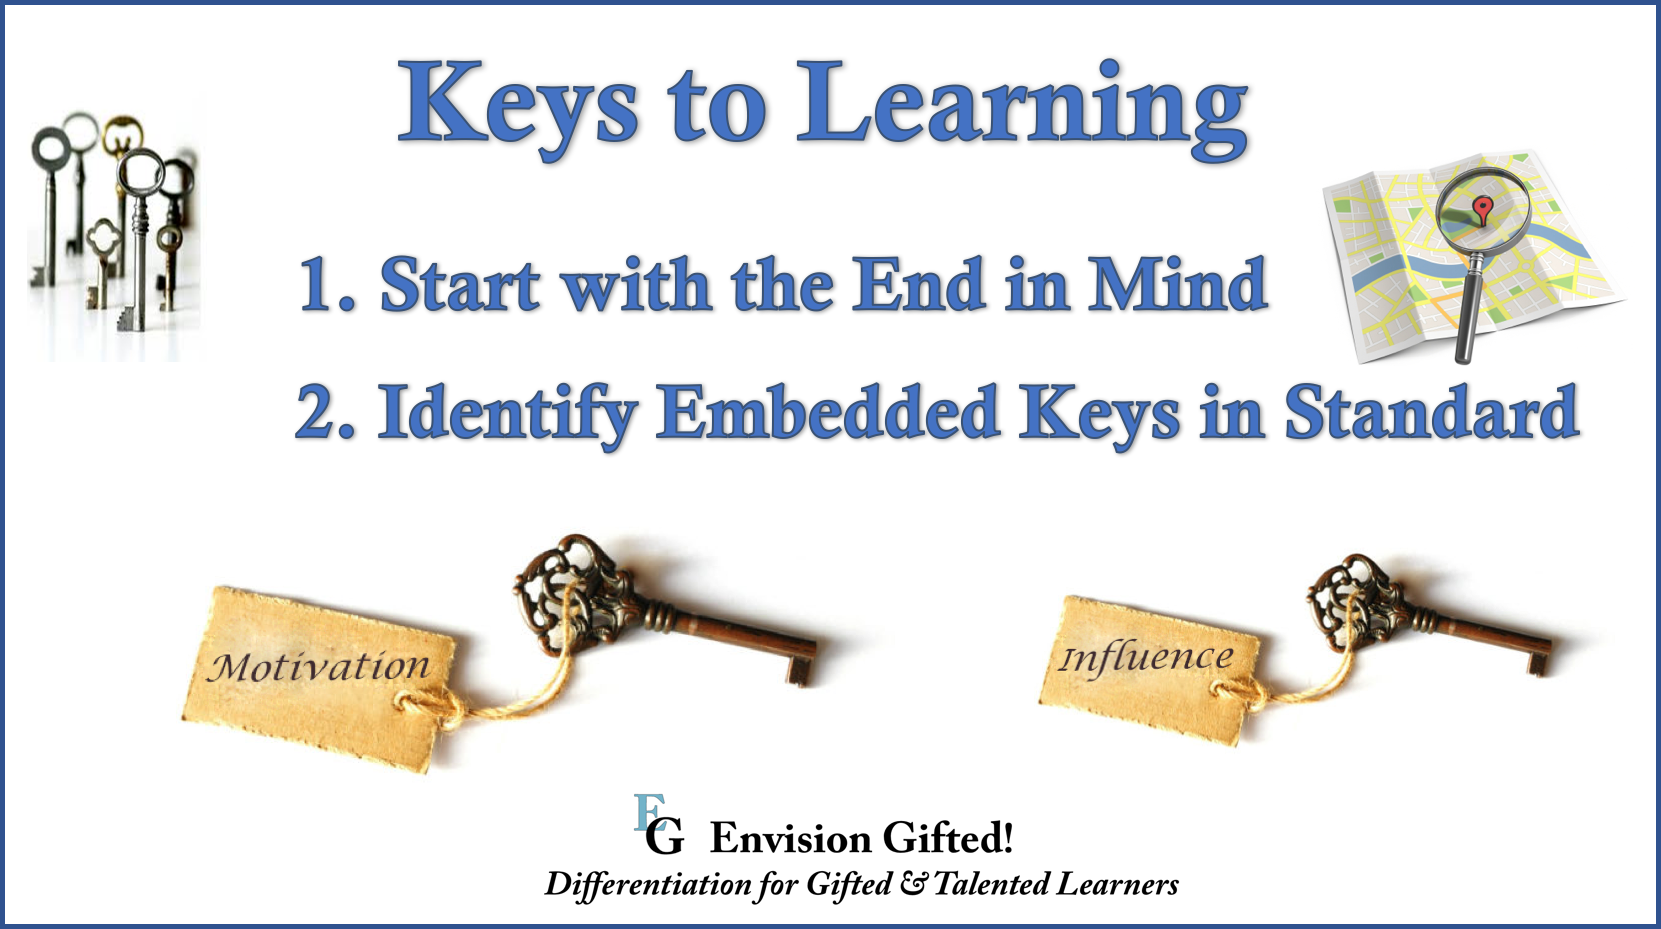 Envision Gifted. Keys Getting Started